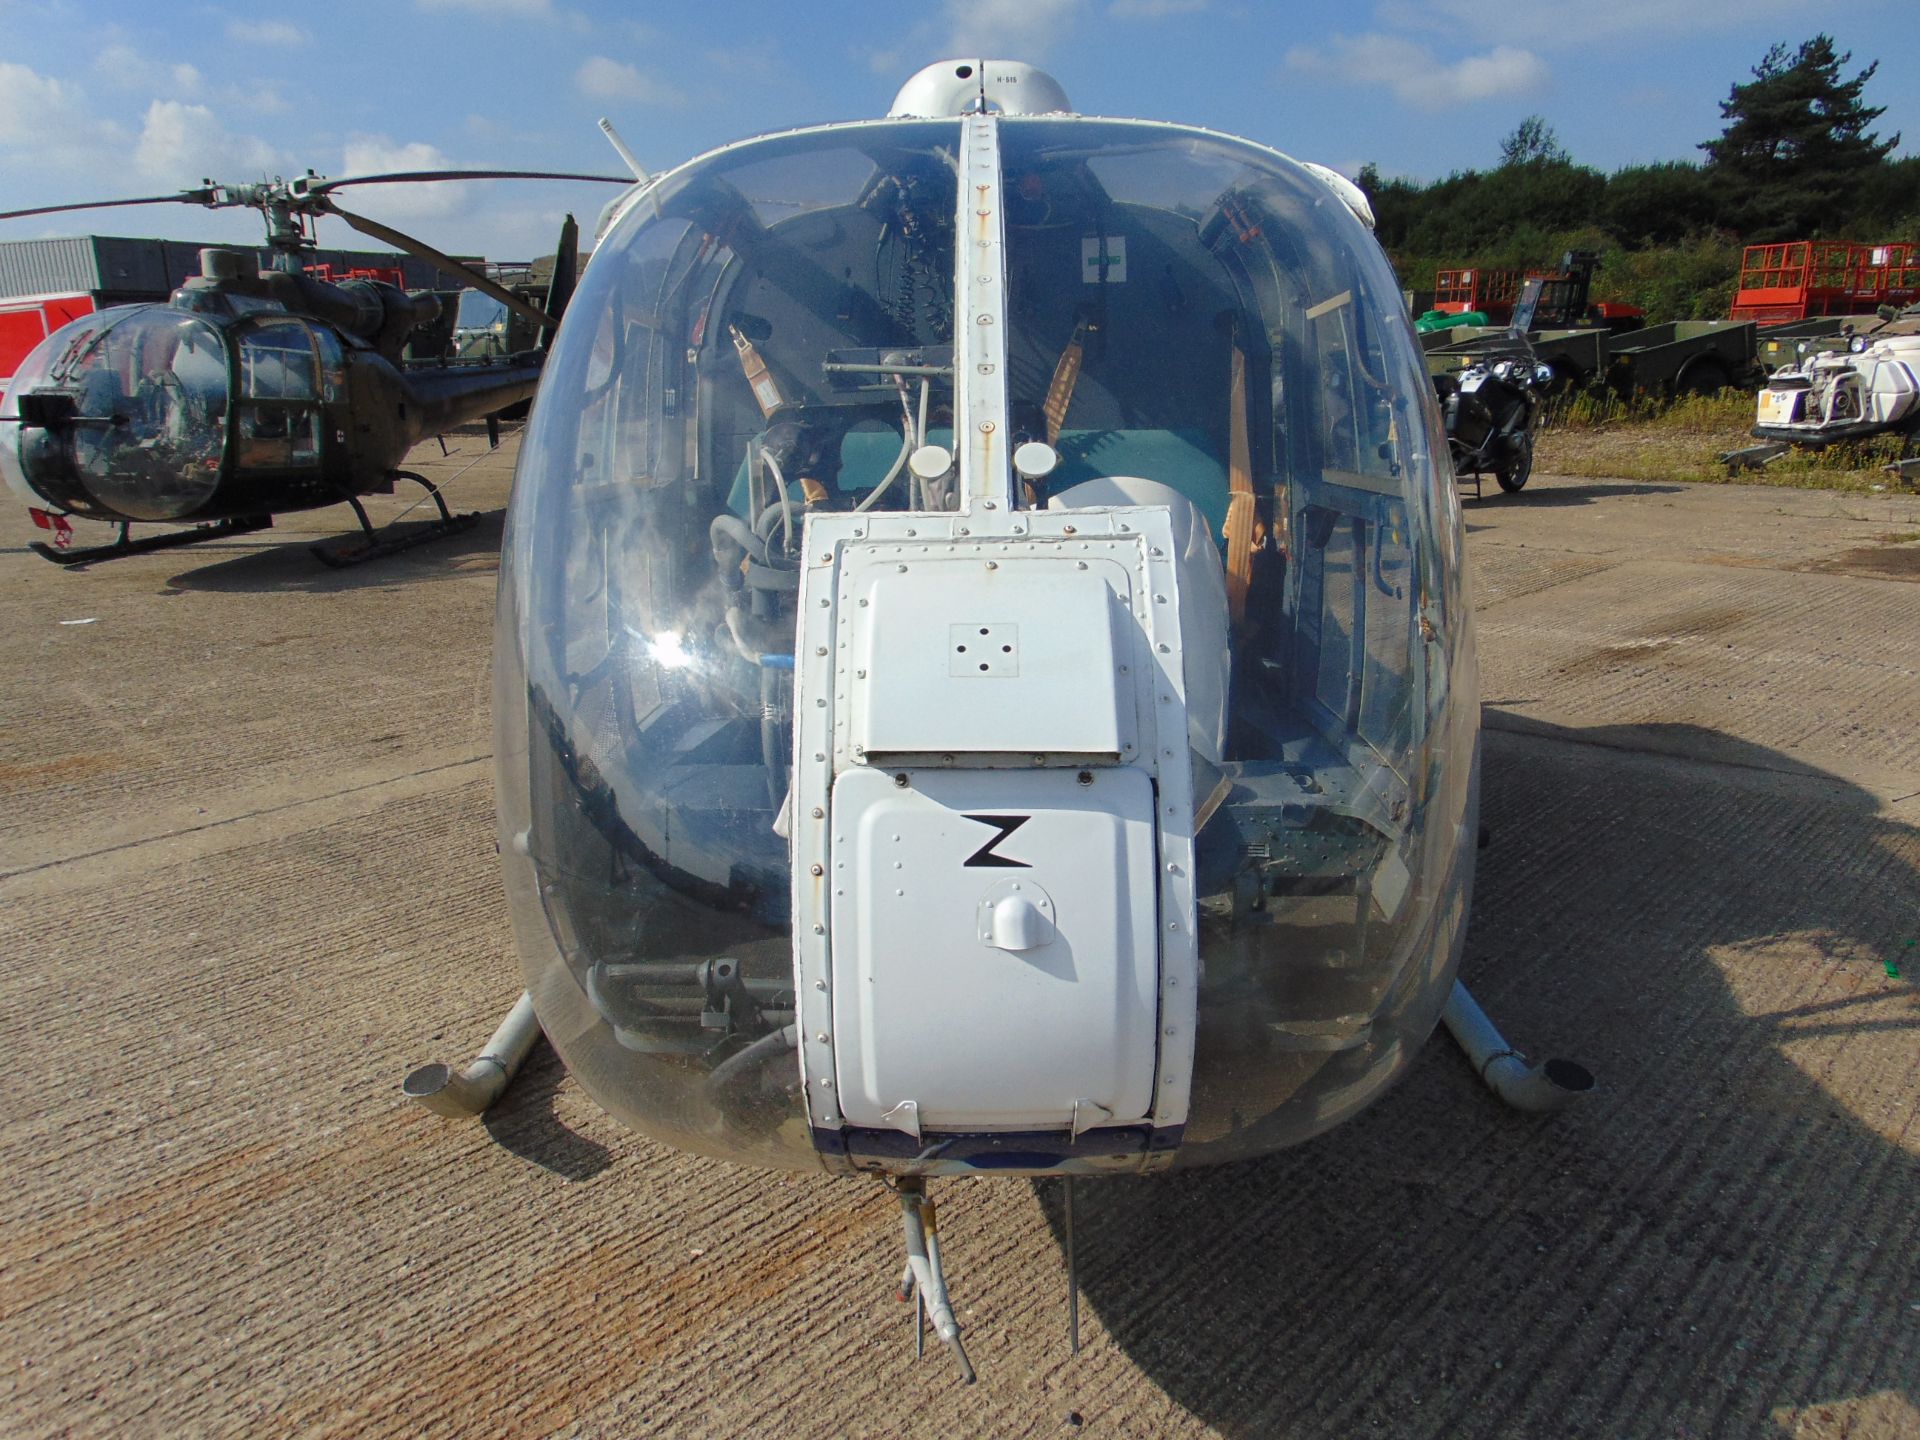 GAZELLE TURBINE HELICOPTER XZ935 Sn 1742 From the UK Ministry of Defence with paperwork as shown. - Image 3 of 22